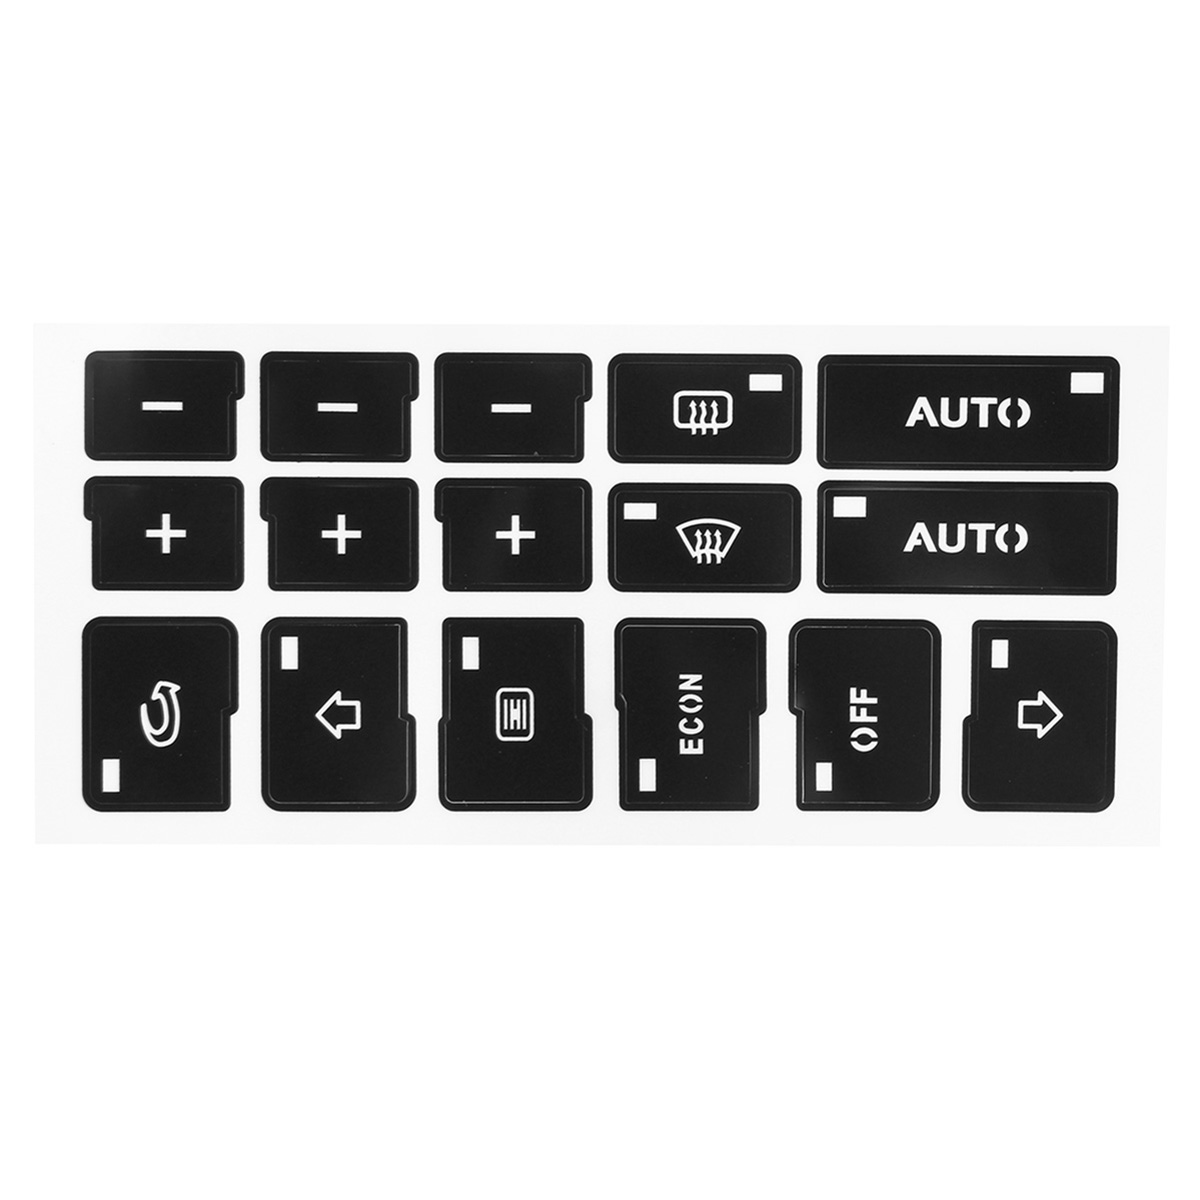 AC Climate Control Button Repair Stickers Decals for Audi A4 B6 B7 2000-2004